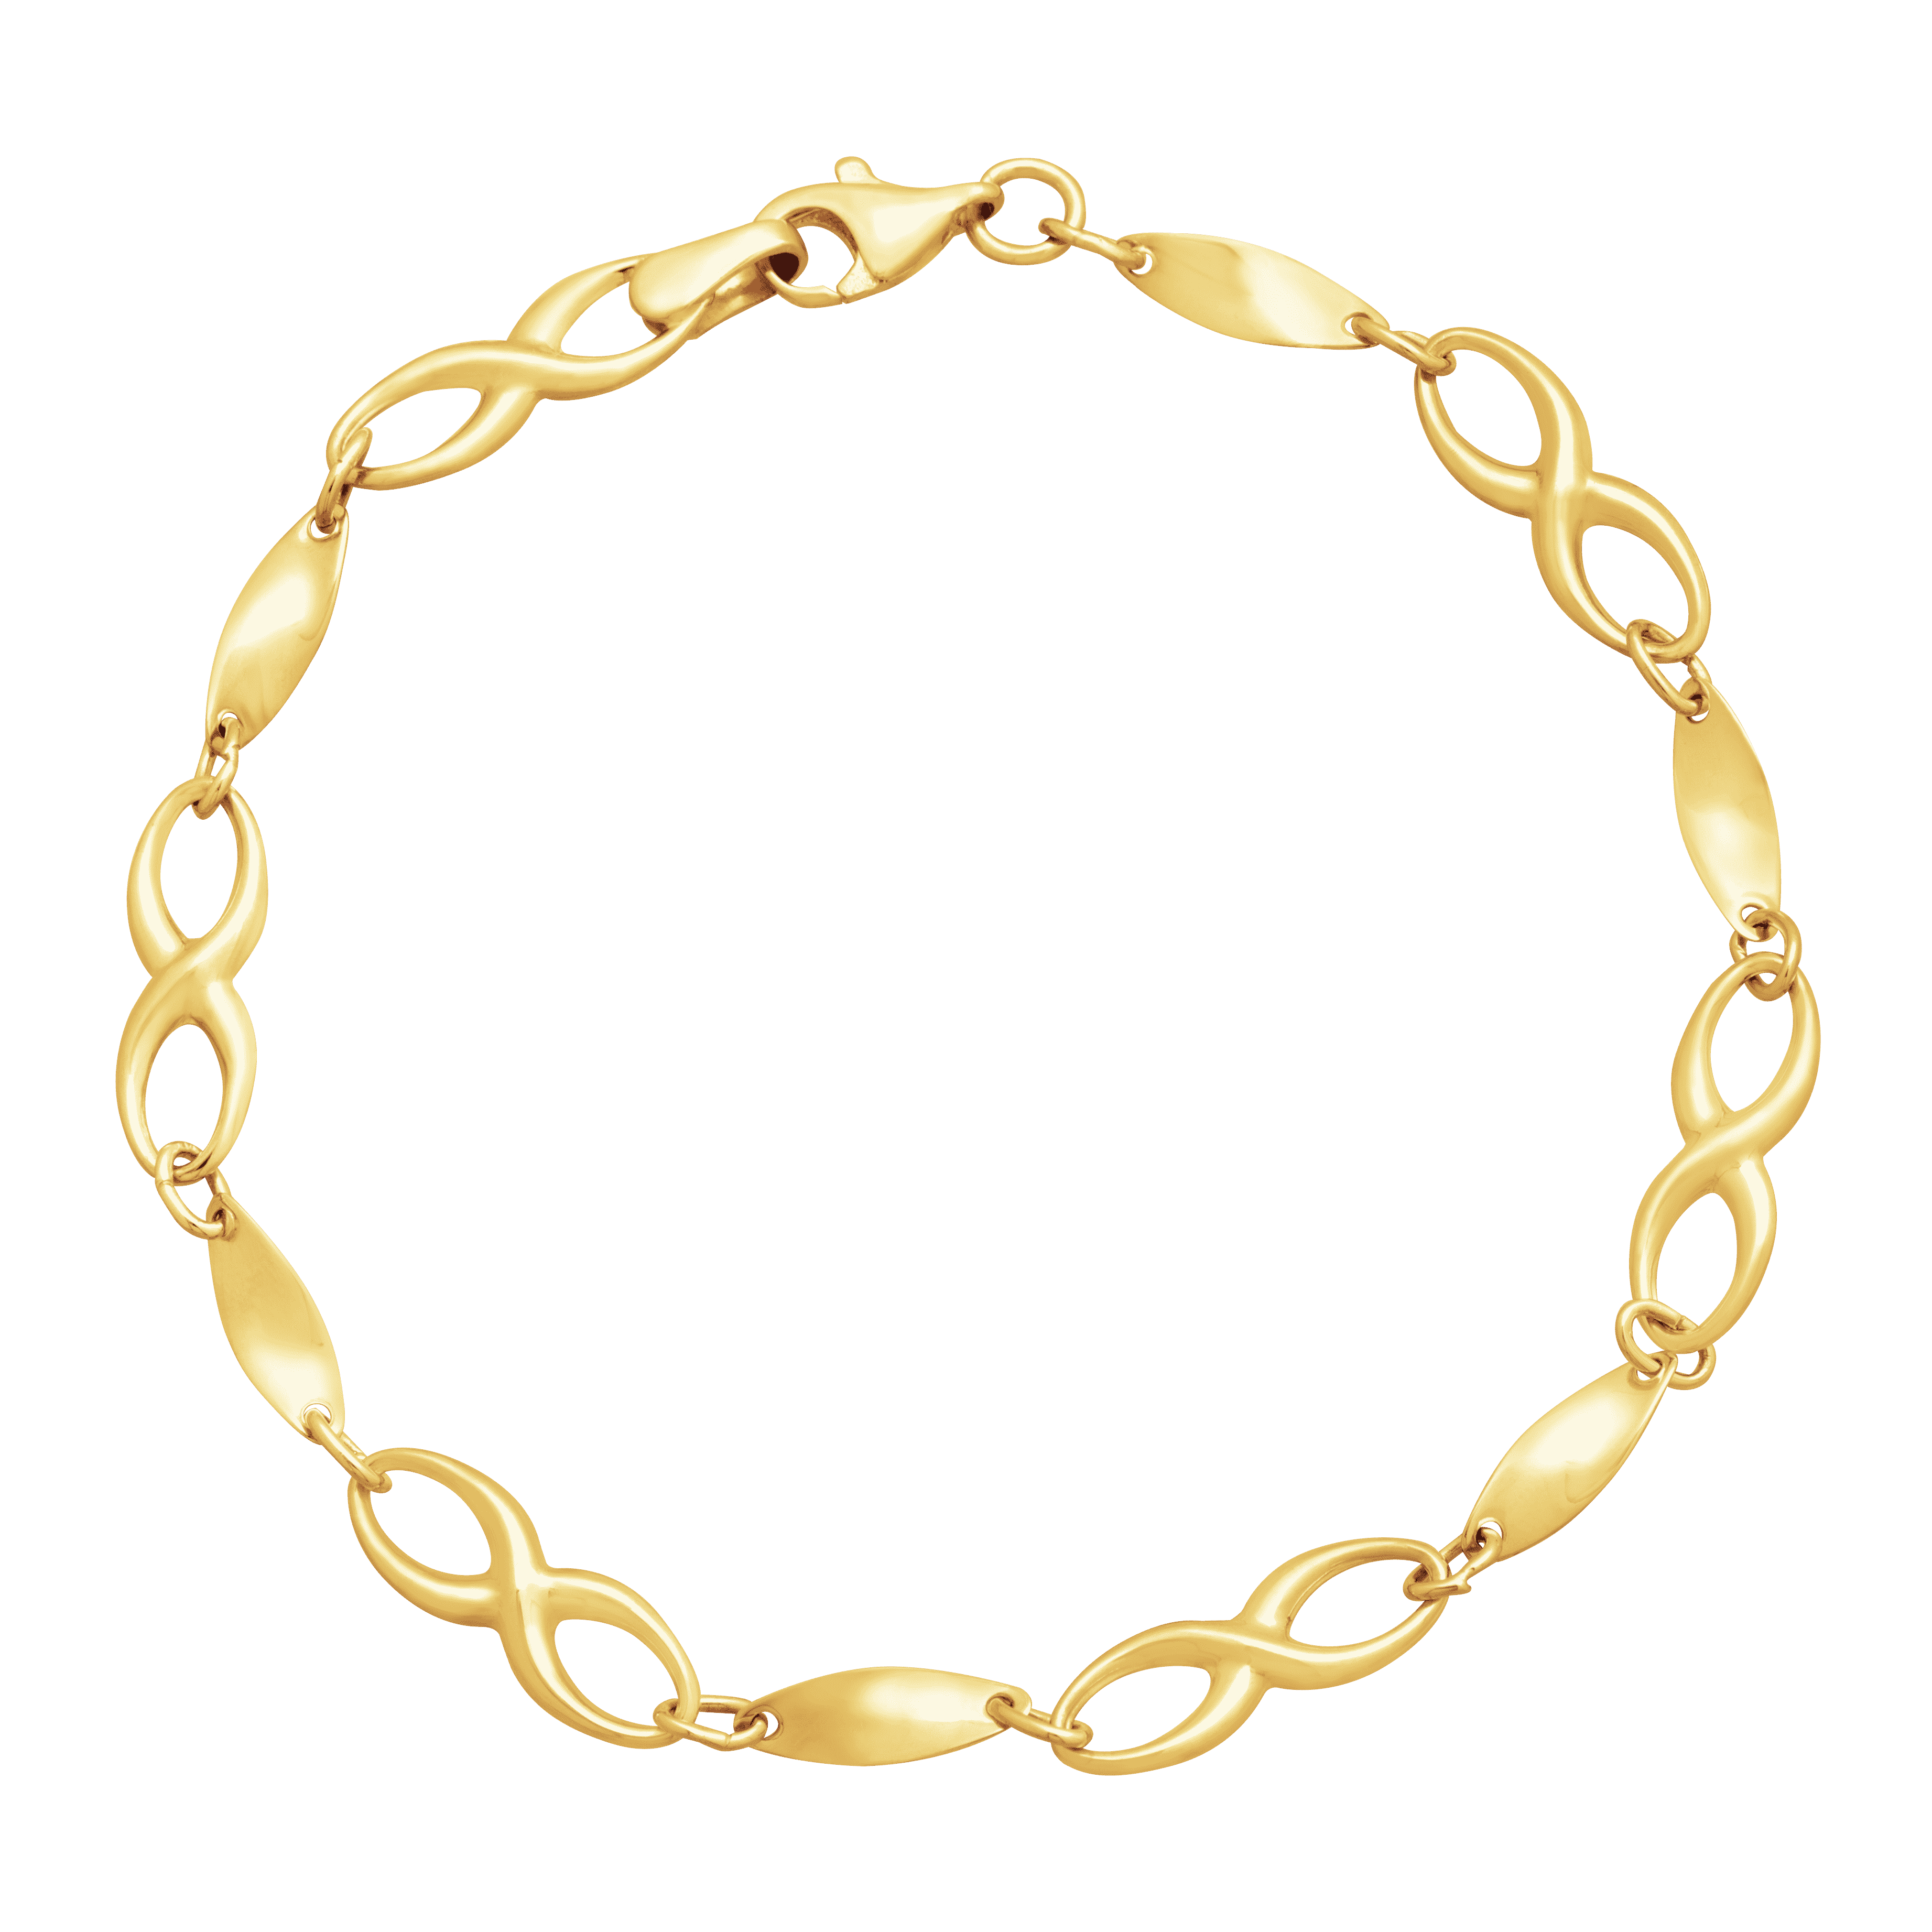 Pre-owned Welry Infinity Link Bracelet In 14k Yellow Gold, 7"